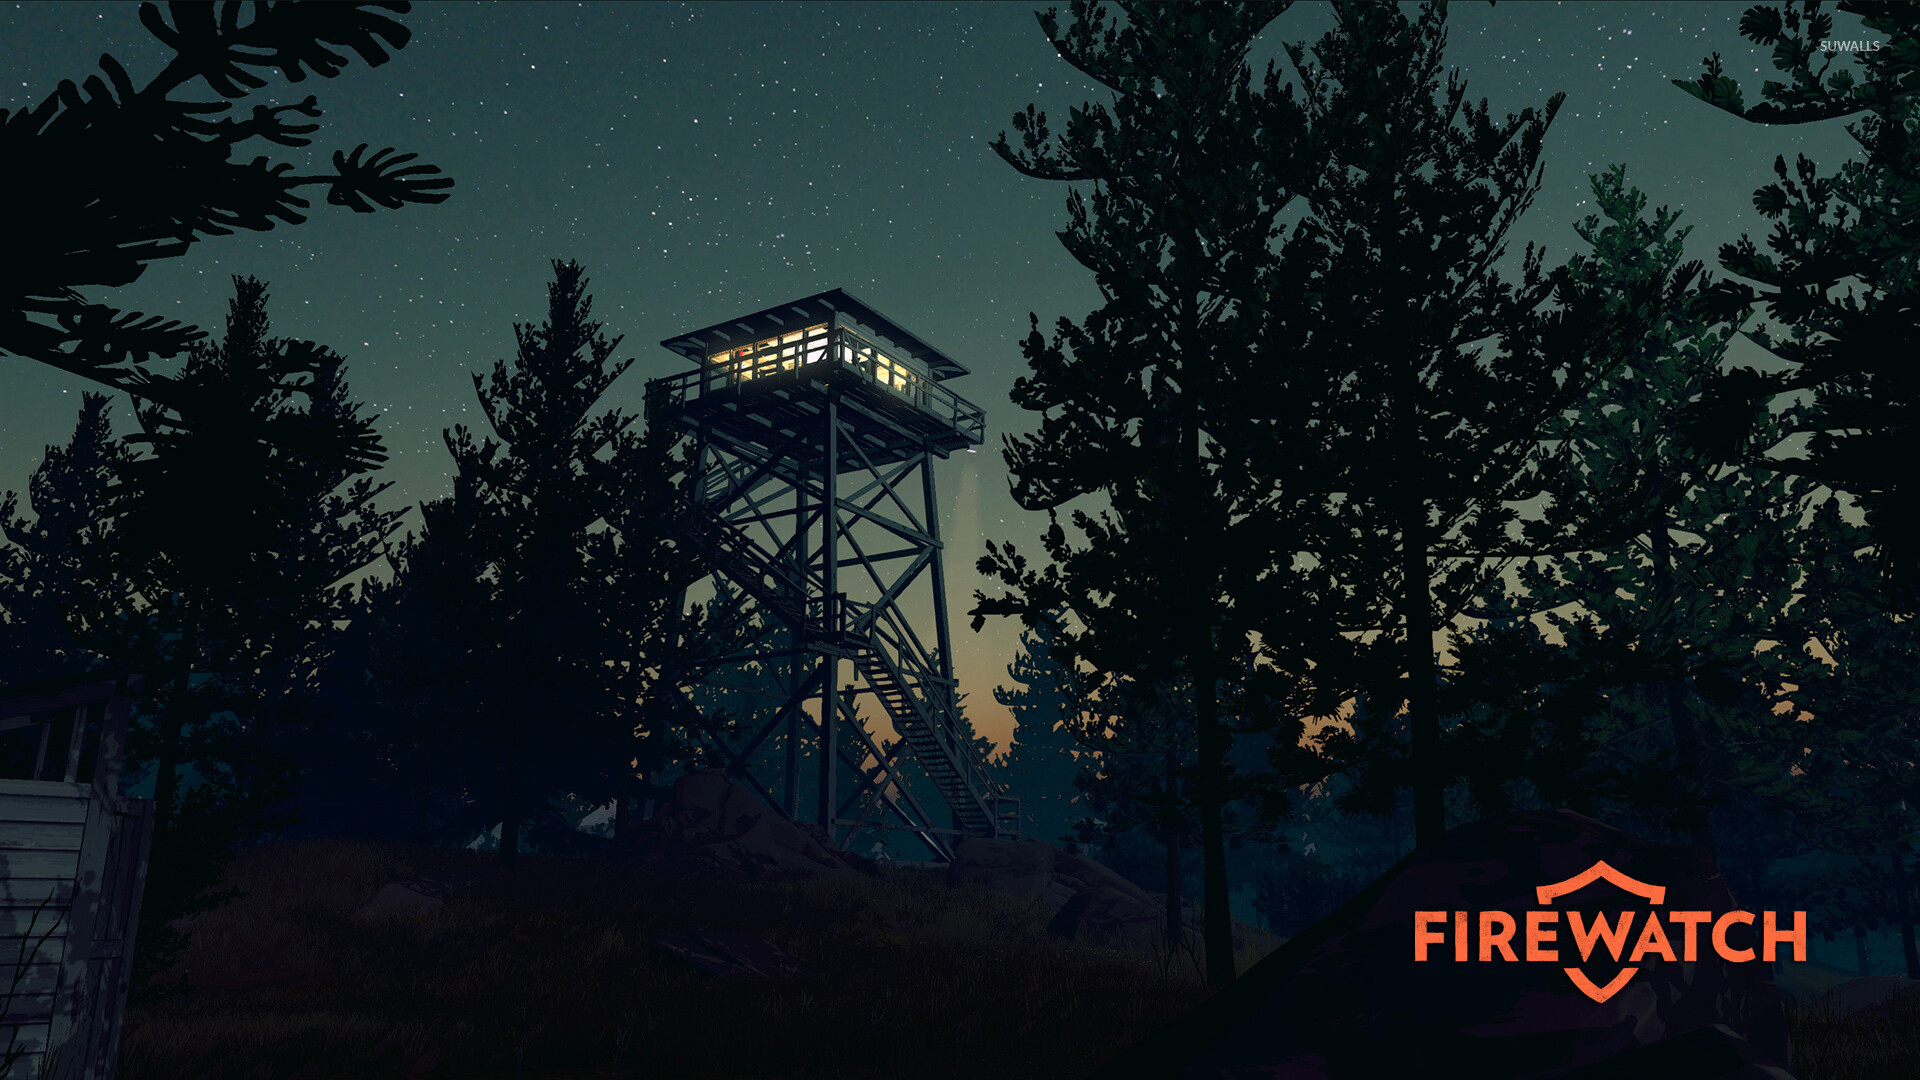 Firewatch: Fire lookout tower in the night, Video game. 1920x1080 Full HD Wallpaper.